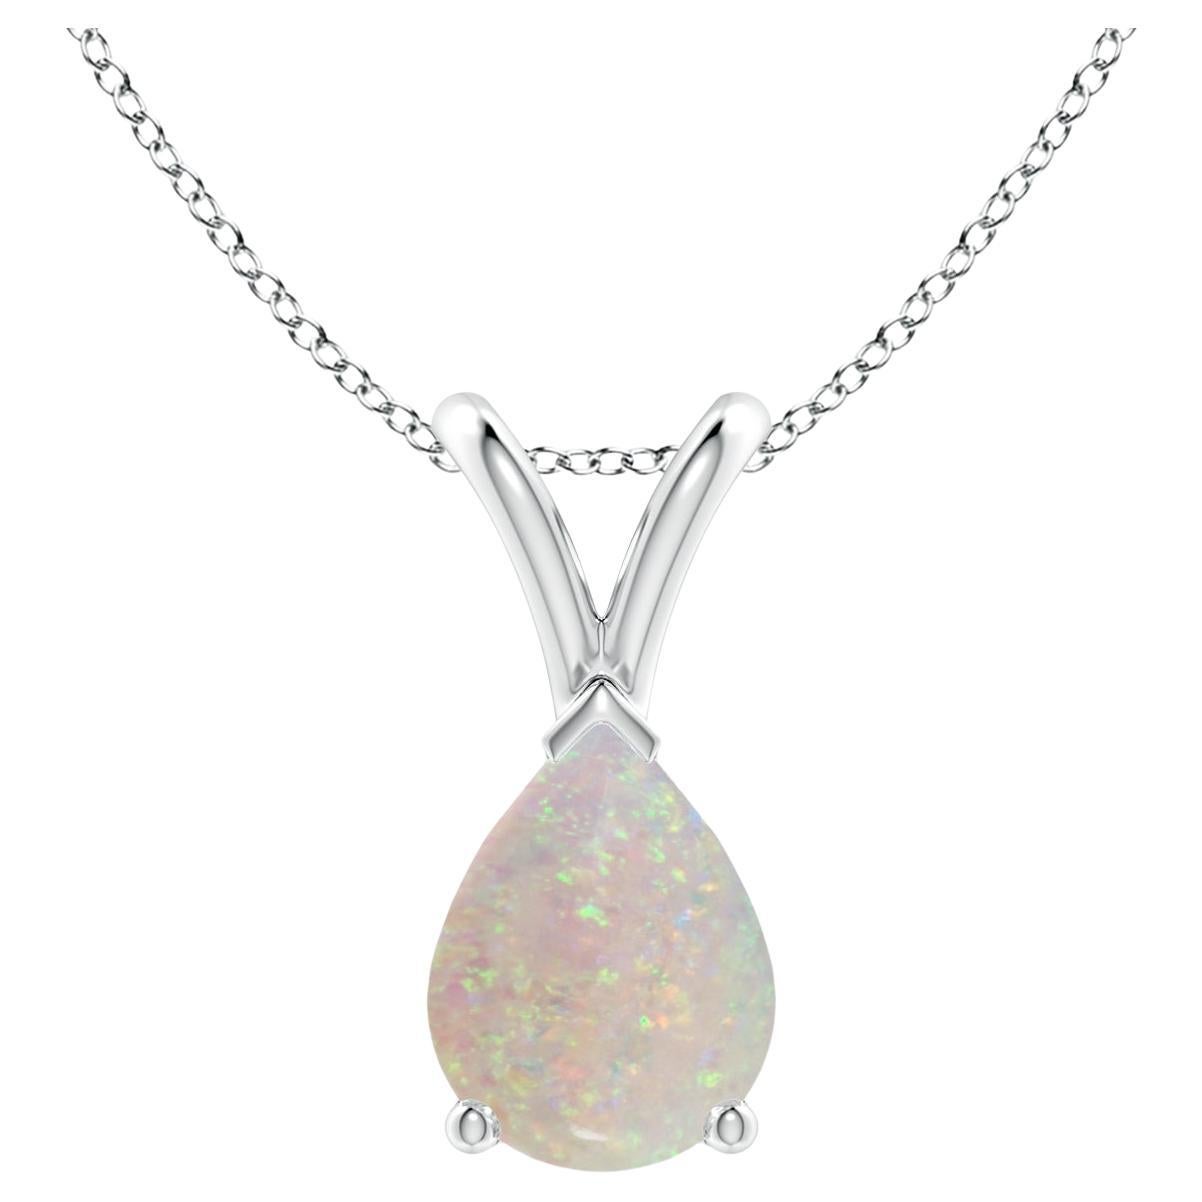 ANGARA Natural V-Bale Pear-Shape 0.70ct Opal Solitaire Pendant in 14K White Gold